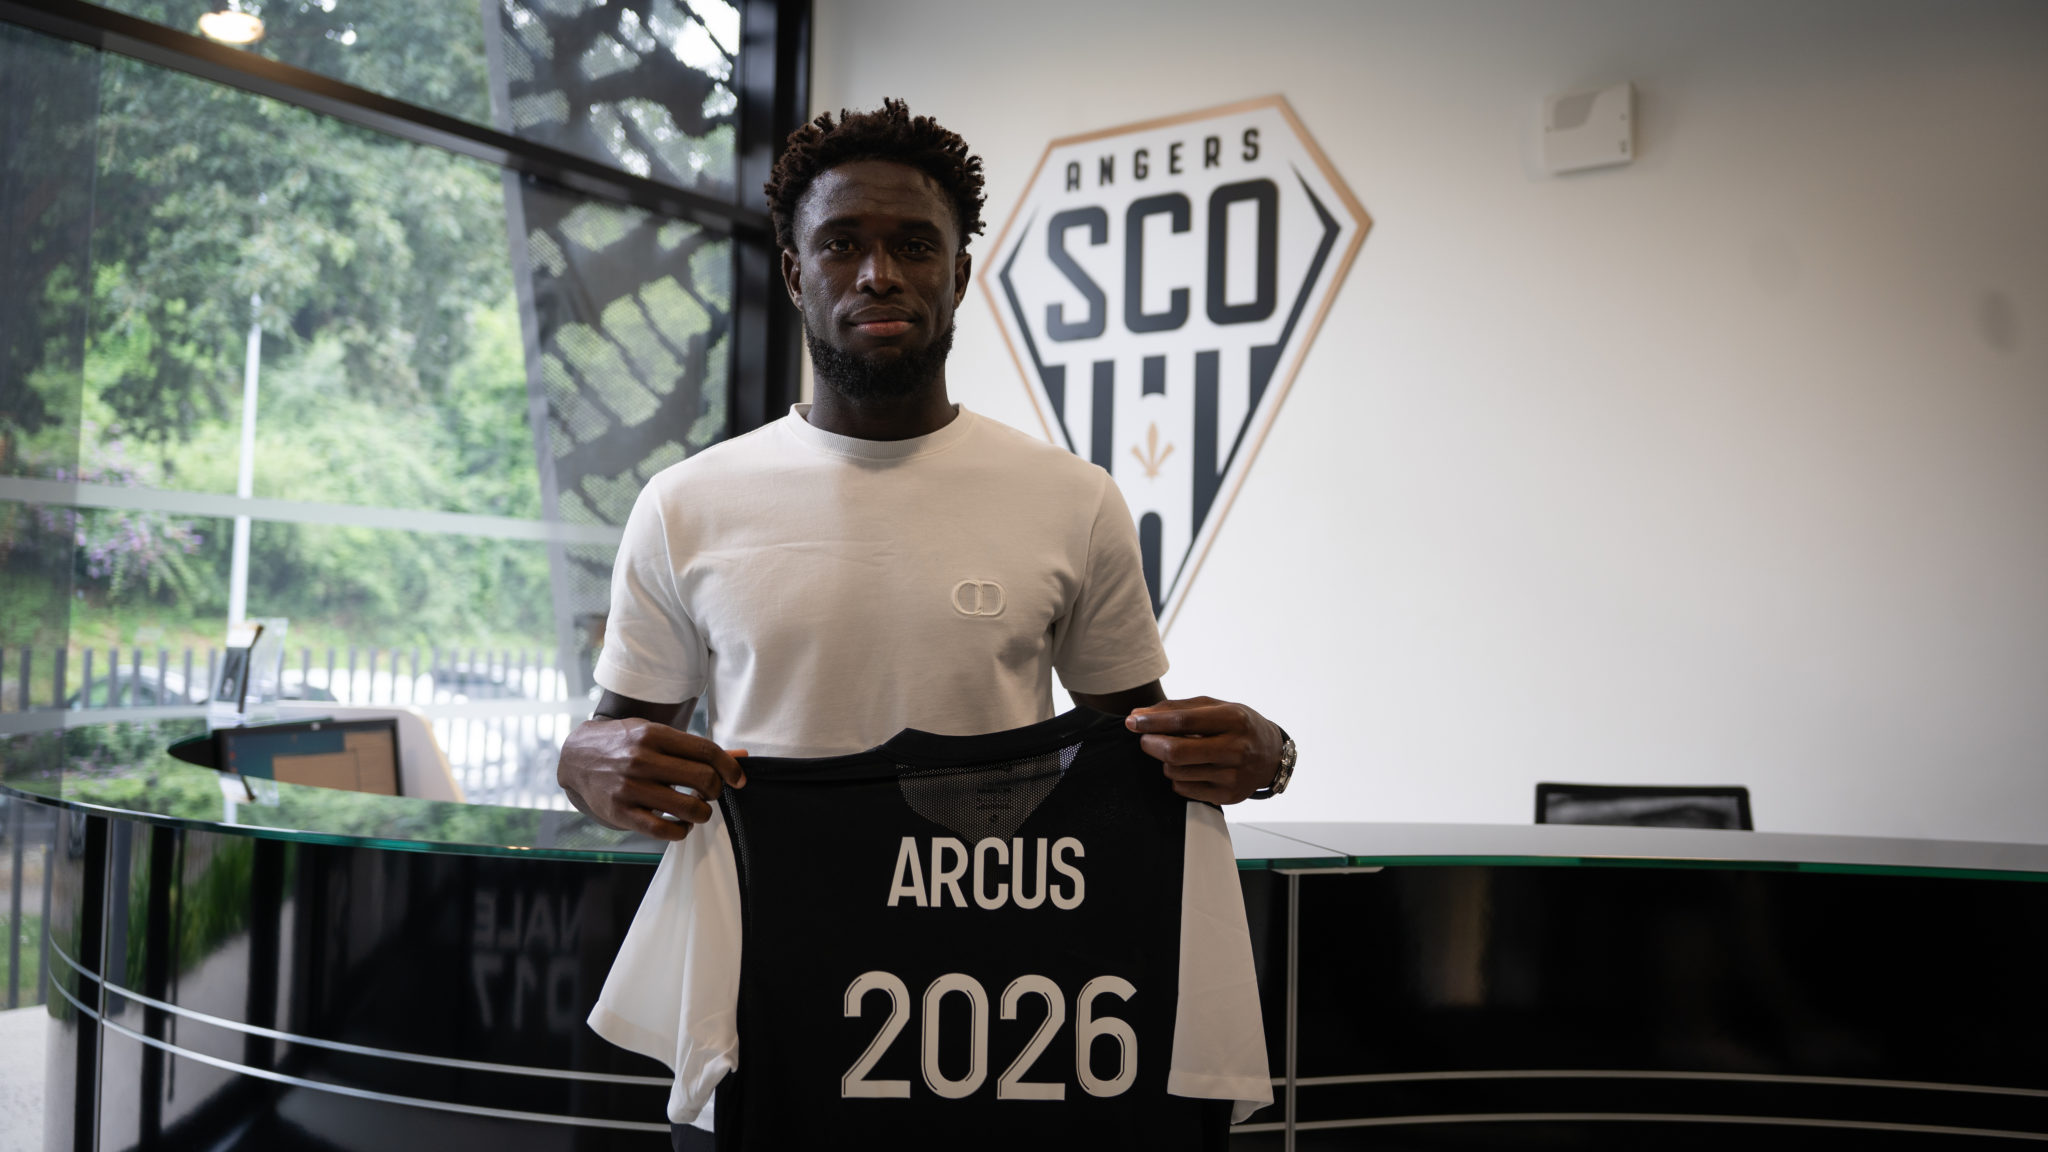 Carlens Arcus signs with Angers SCO in France. Photo: Angers SCO Twitter